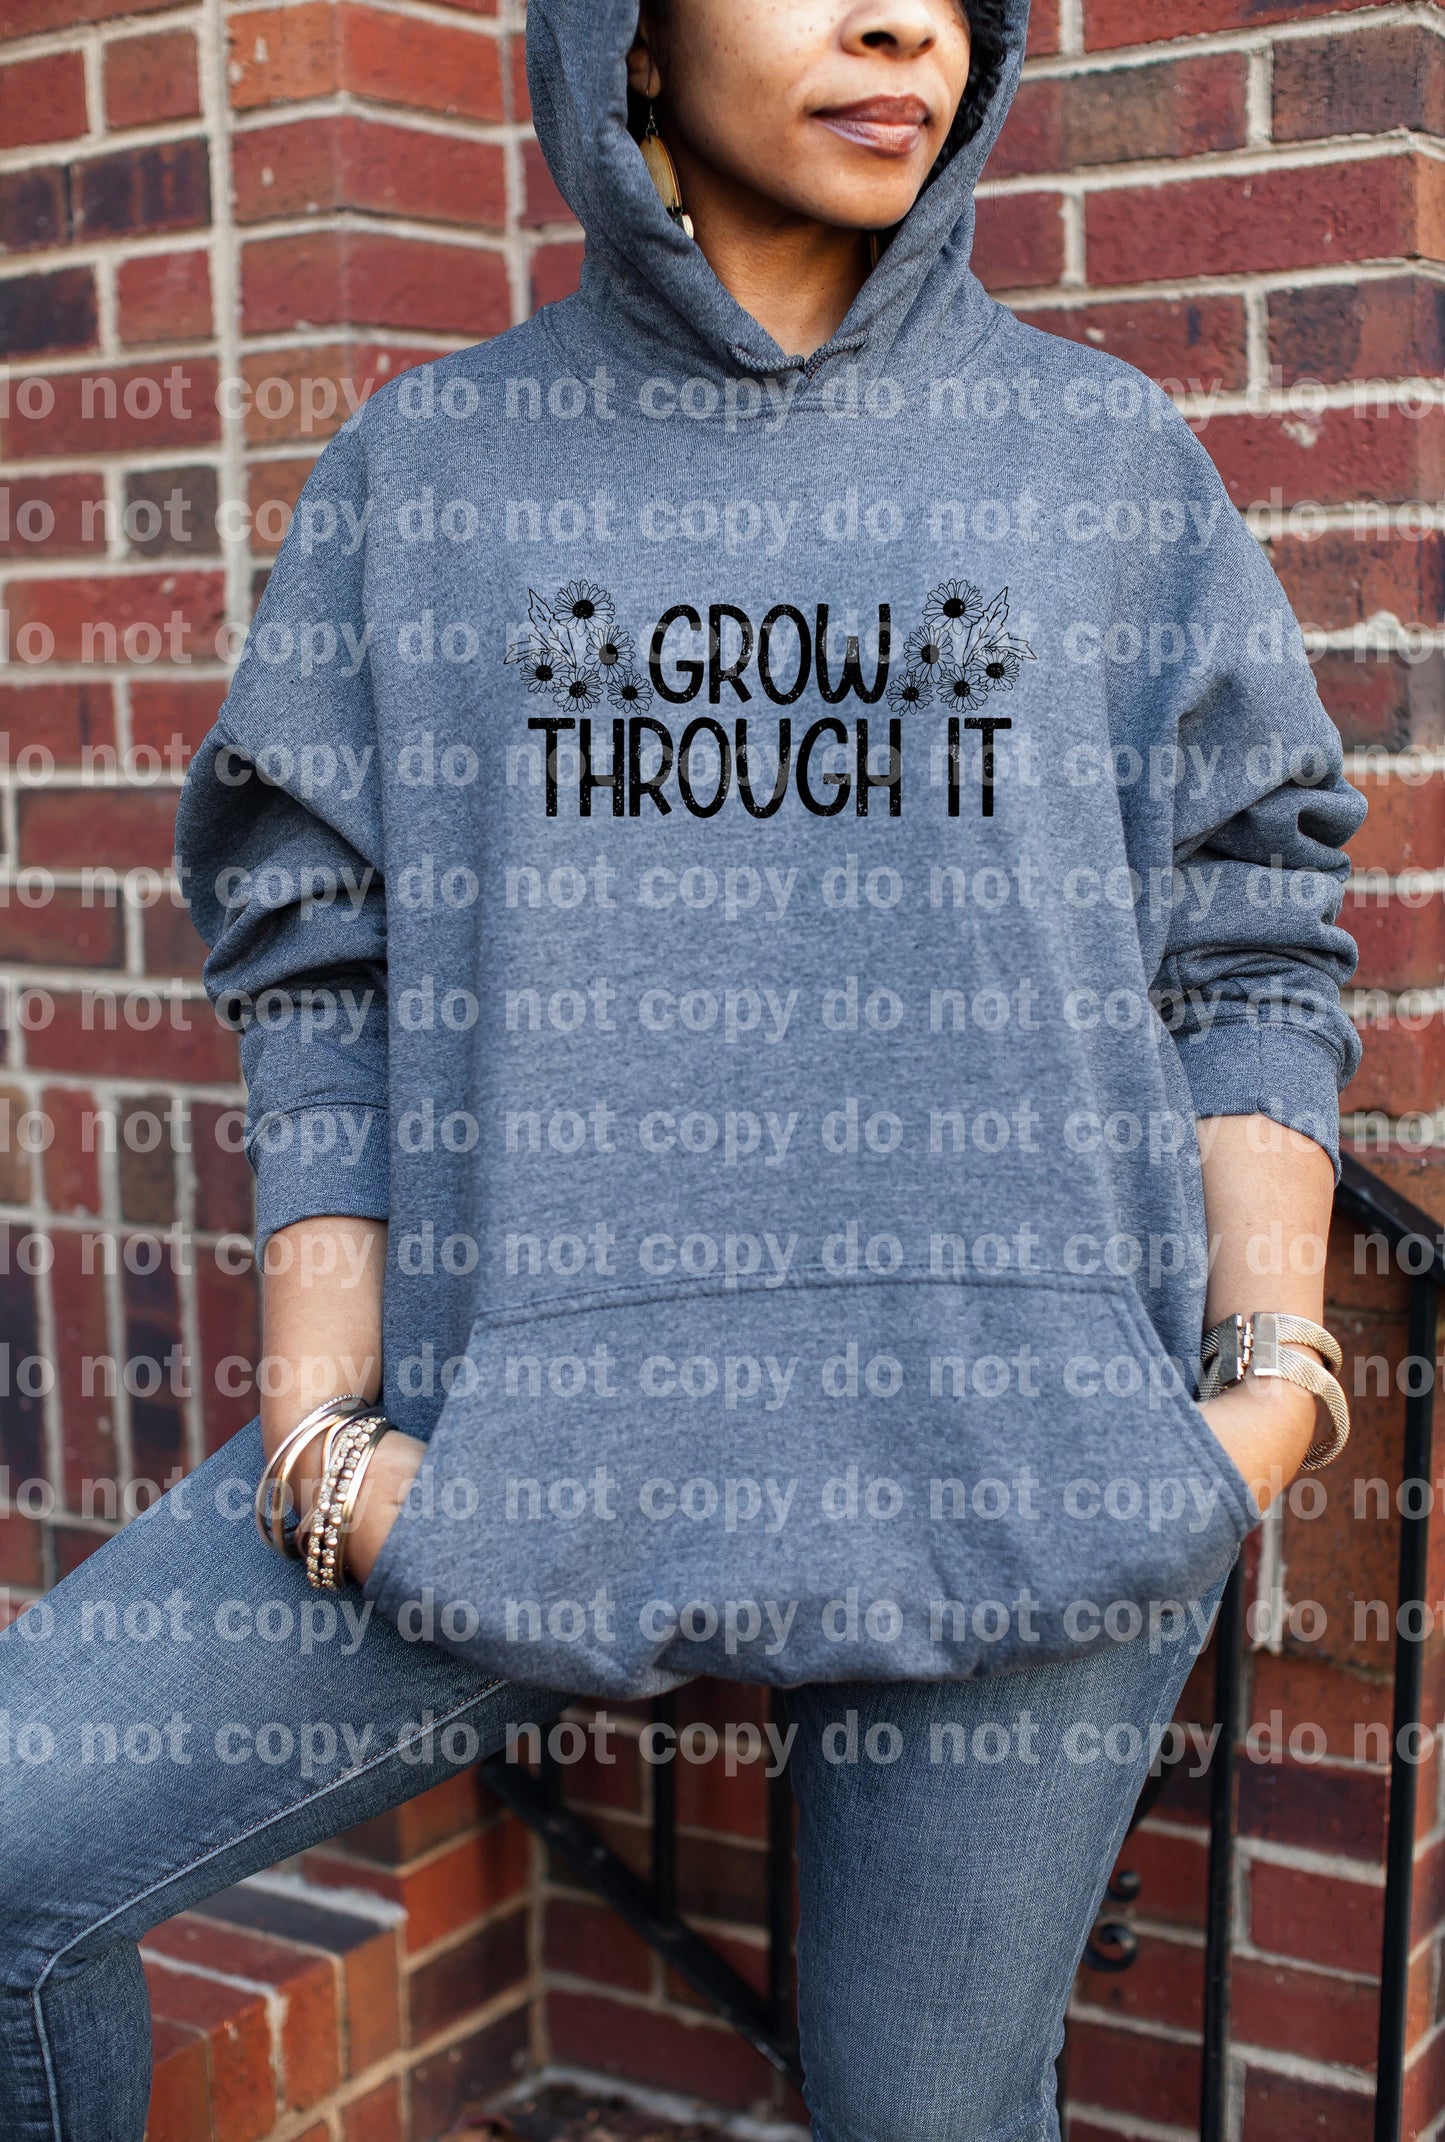 Grow Through It Distressed Full Color/One Color Dream Print or Sublimation Print